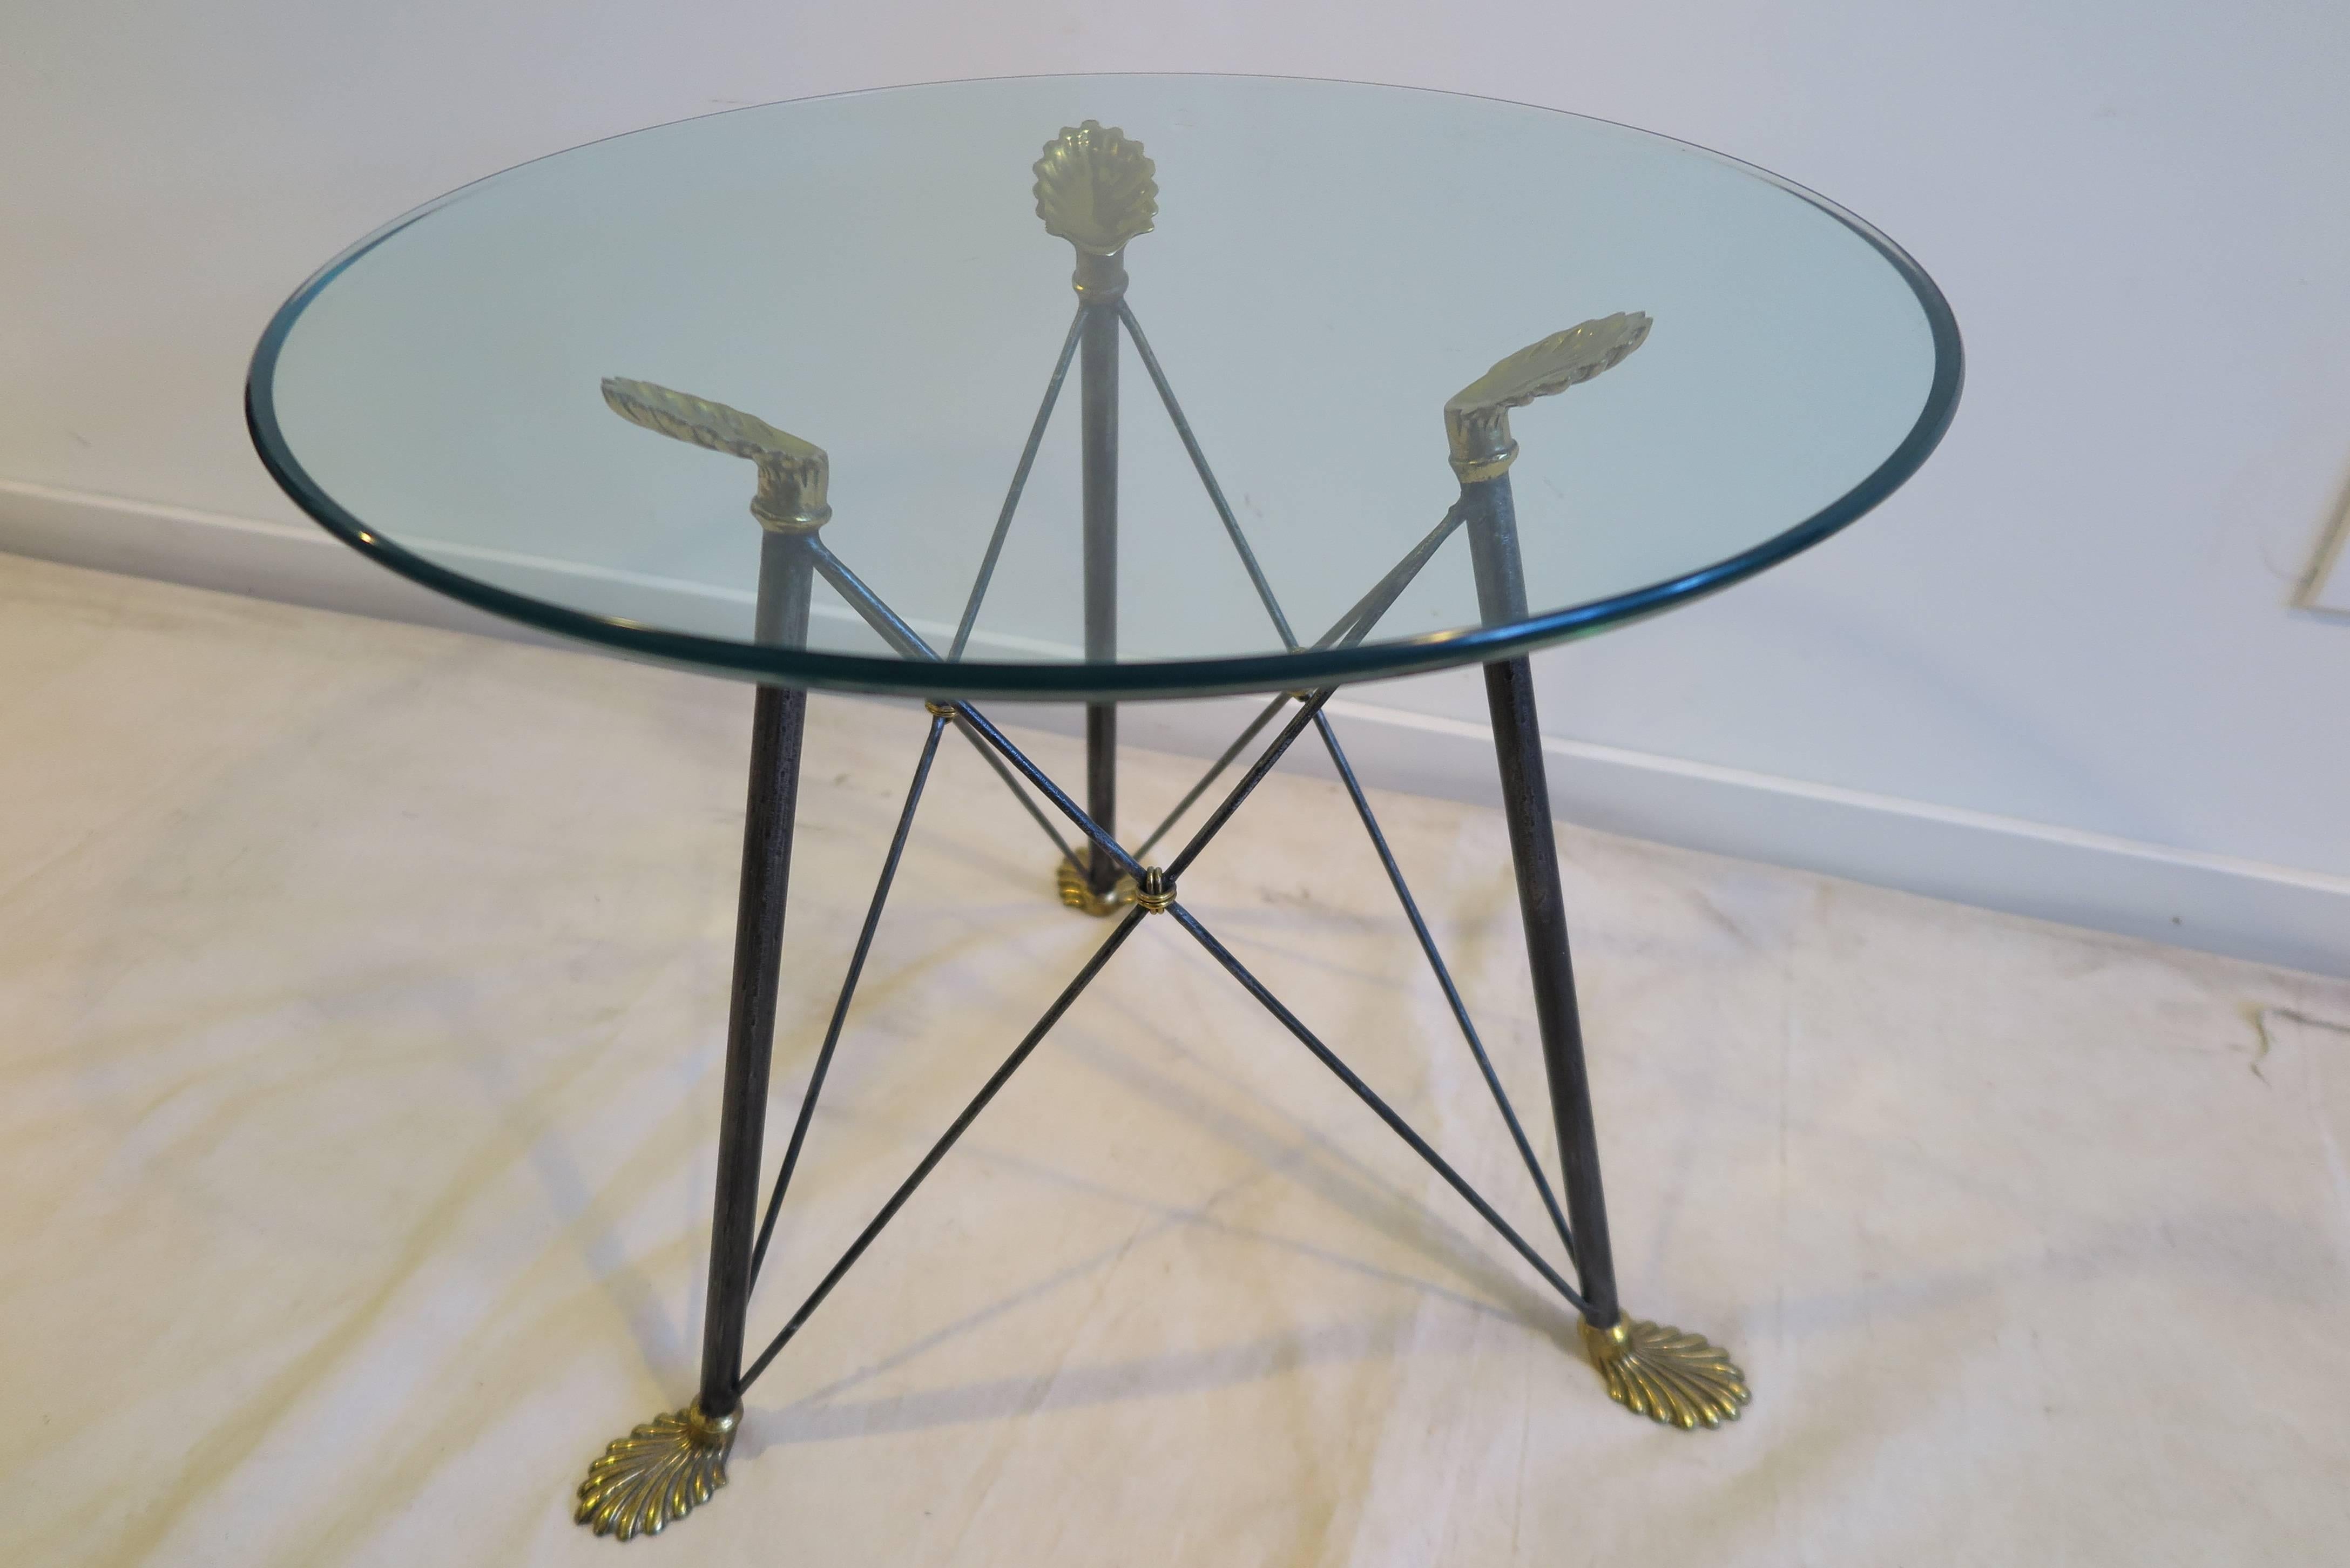 Mid Century French regency style glass side table, cocktail table, end table. Glass top with steel ‘X’ frame base with brass feet and hands having brass knot details in the style of Jansen. Light scratches to the glass, Very good condition. 